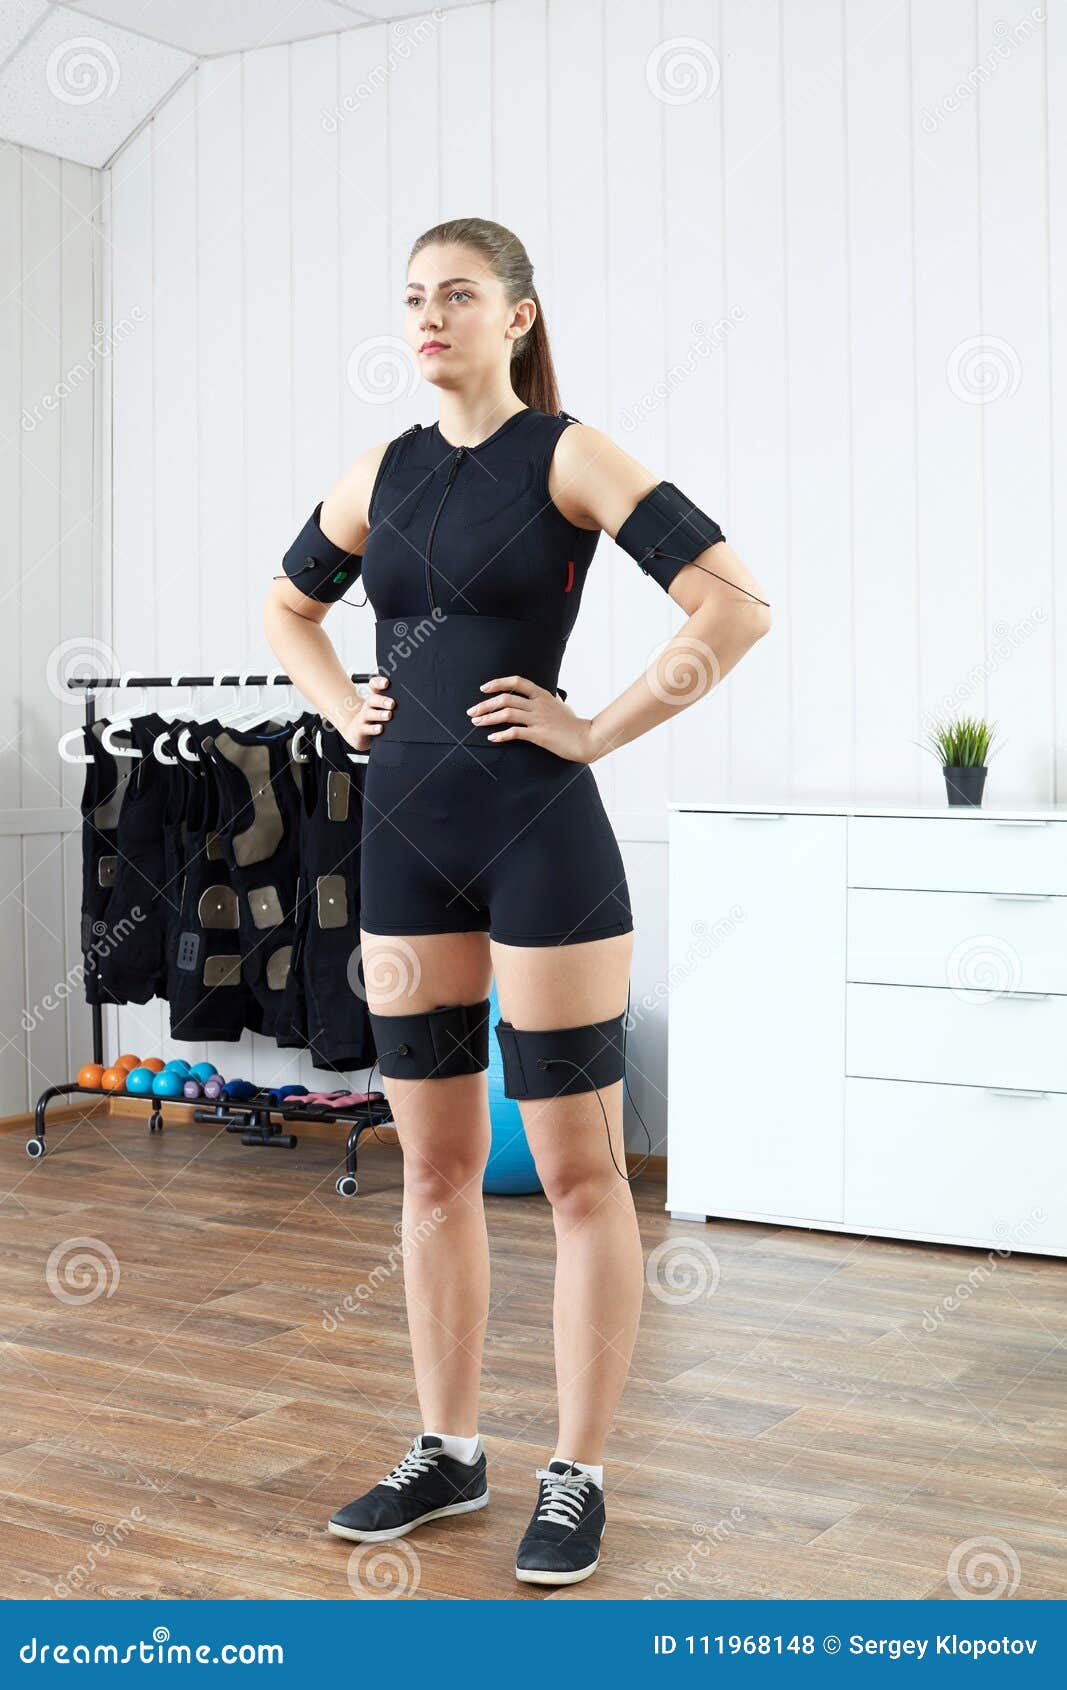 https://thumbs.dreamstime.com/z/beautiful-young-girl-suit-training-electric-muscular-stimulation-prepares-training-hall-ems-training-111968148.jpg